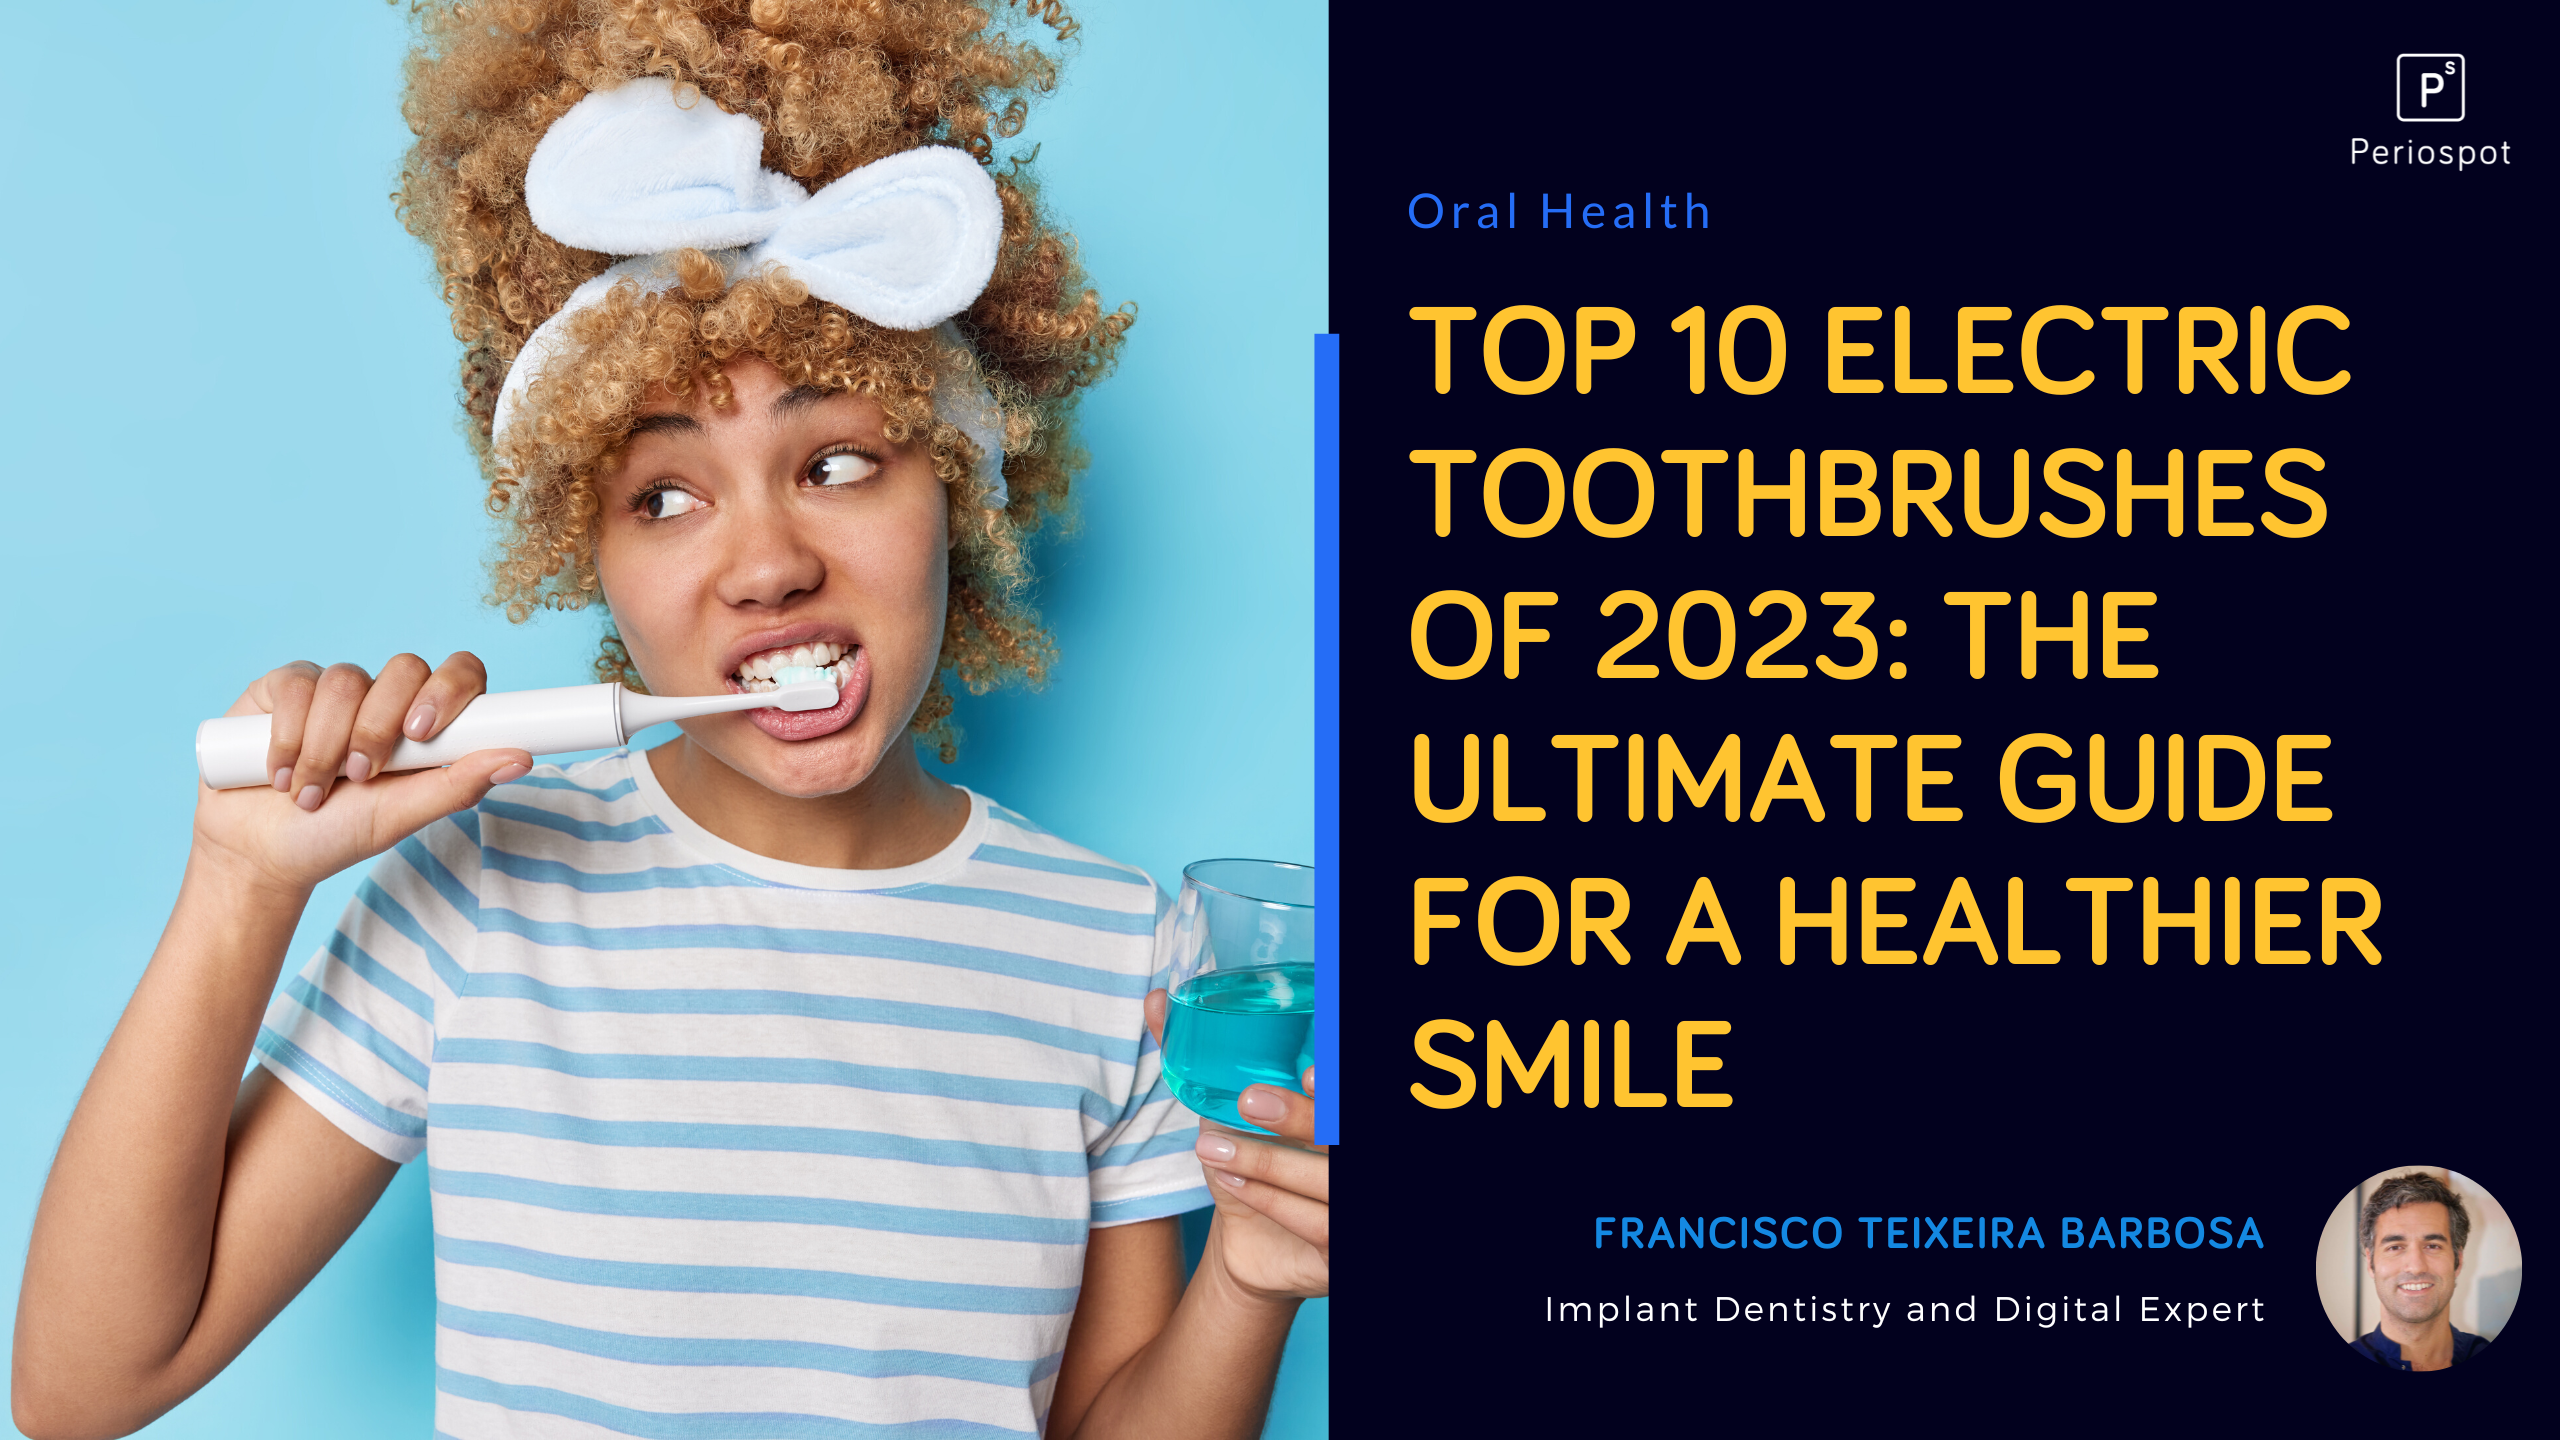 https://periospot.com/wp-content/uploads/2023/03/Top-10-Electric-Toothbrushes-of-2023-The-Ultimate-Guide-for-a-Healthier-Smile.png